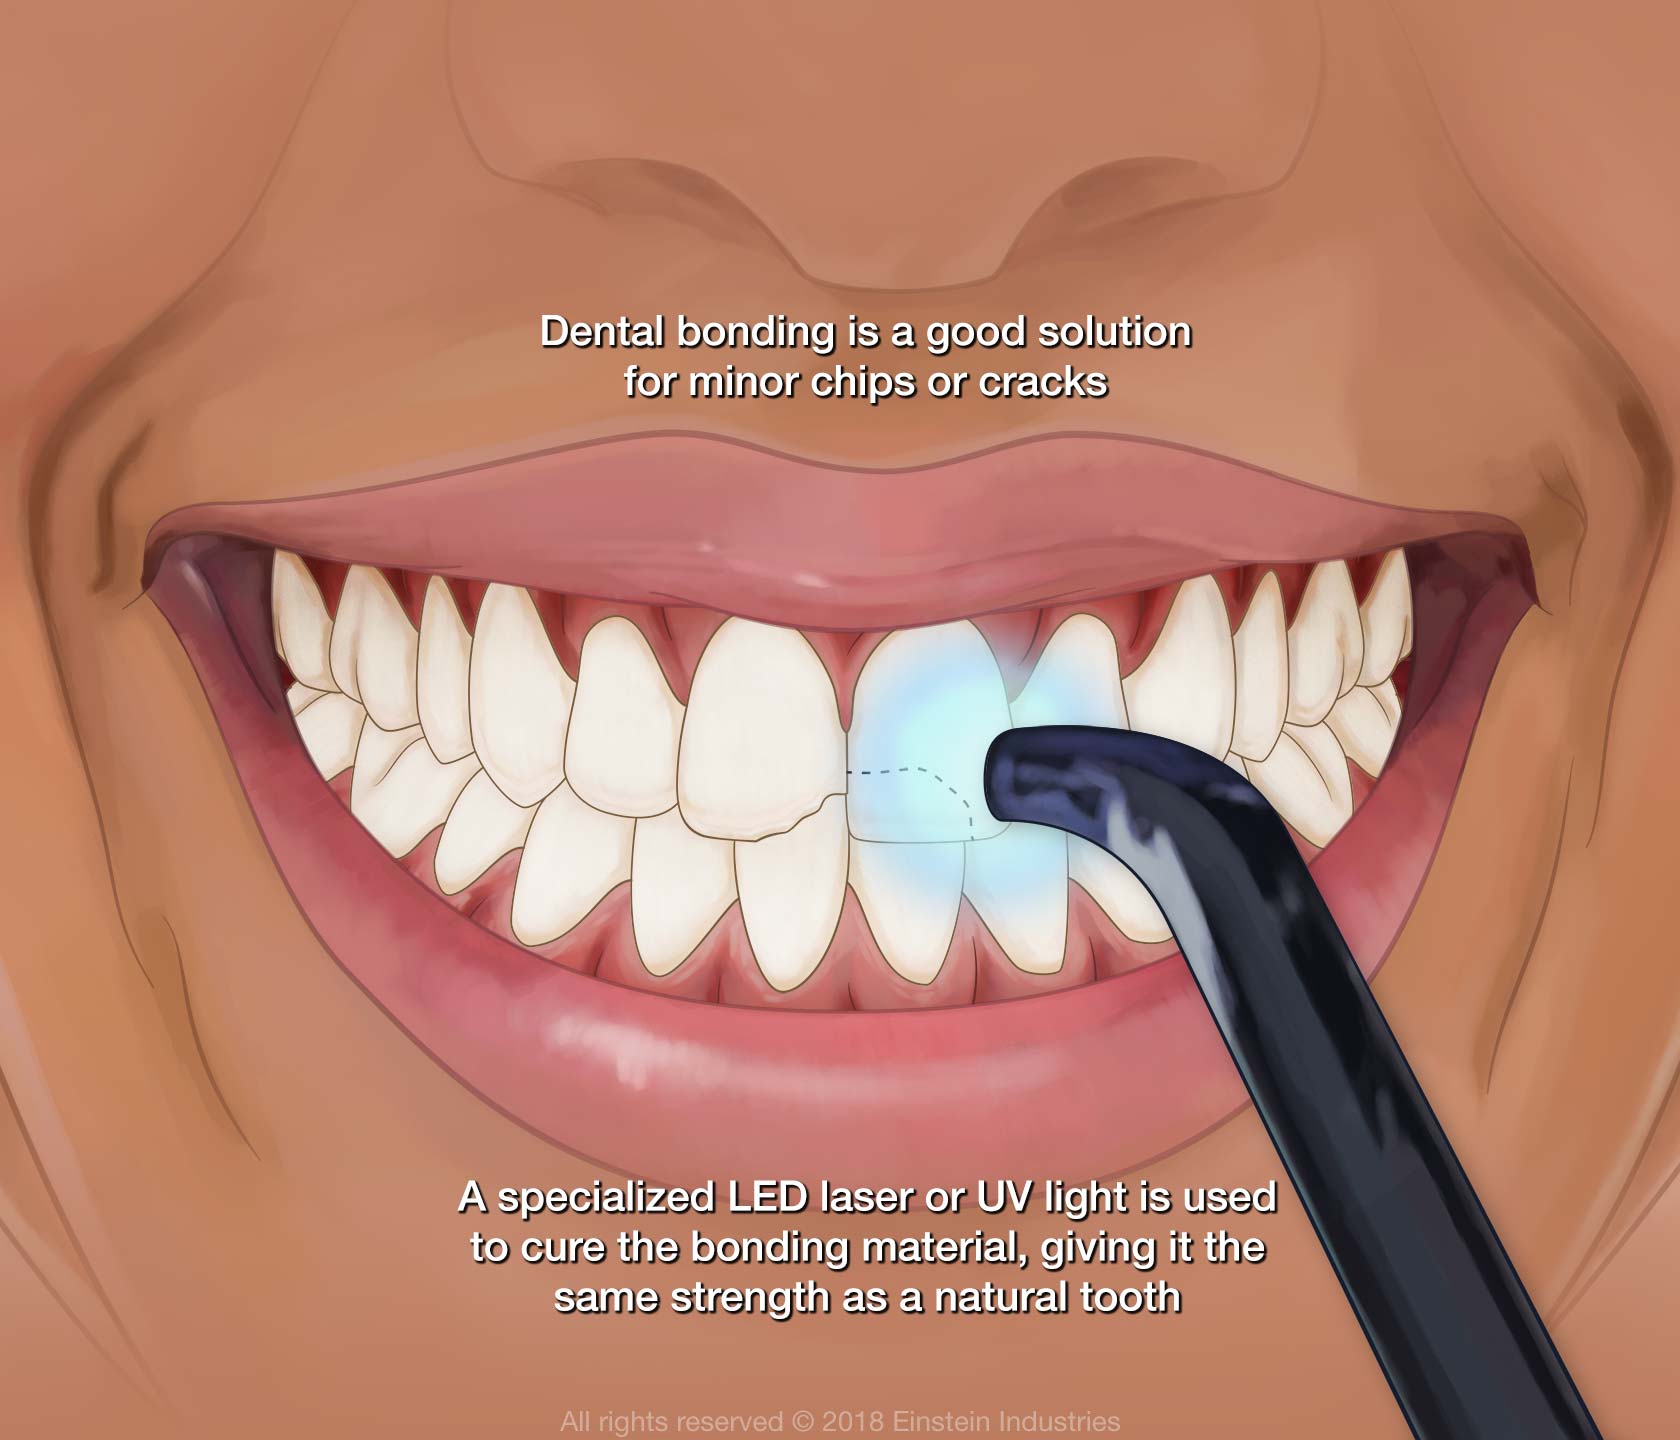 Tooth bonding is the application of composite resin to the surface of the tooth to repair it. It’s a simple, inexpensive cosmetic dental procedure that is usually completed in a single visit.
Tooth bonding is one of the easiest and least expensive cosmetic dental procedures. There are lots of dental issues that bonding can correct. However, tooth bonding is most often used to correct chipped or discolored teeth. Bonding can also be used to close the large spaces between teeth, change the shape of teeth or make teeth appear longer. In some cases, bonding is used in place of amalgam or metallic fillings to protect the exposed root of a tooth with receded gums.